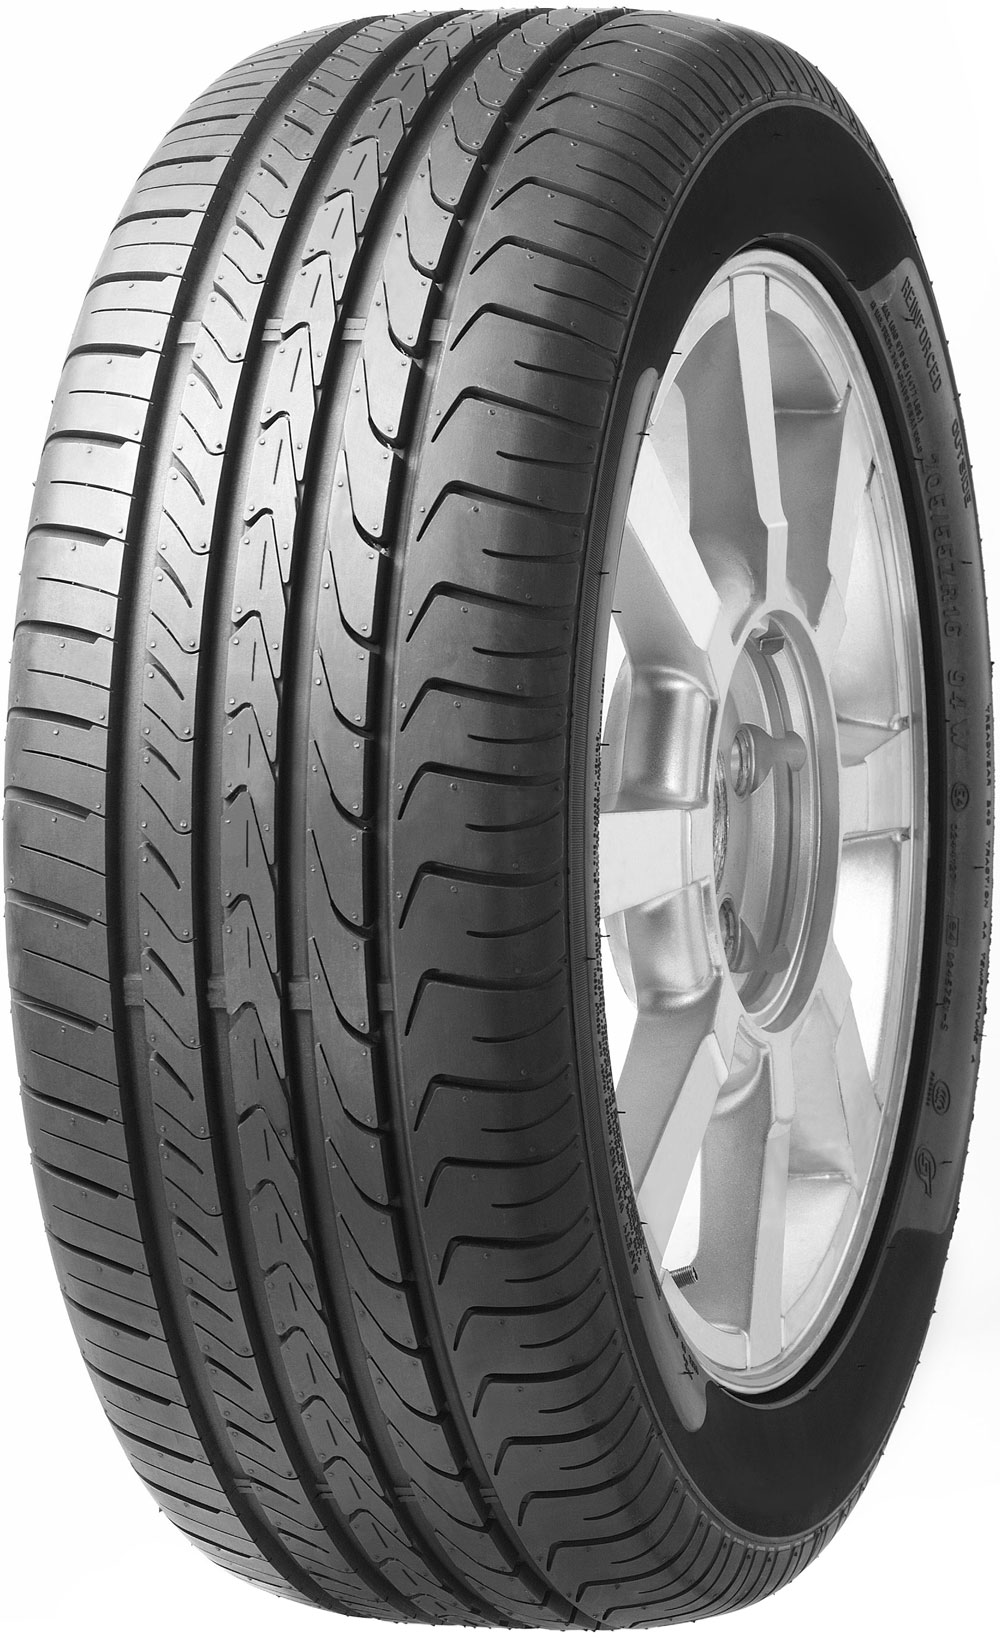 Шины максис виктра. Maxxis m36 Victra. Maxxis m36 Victra RUNFLAT лето 245/50 r18 100w. 225/50 R17 Maxxis m36 94w RF. Шины Maxxis m36 225/50 r17 94w.